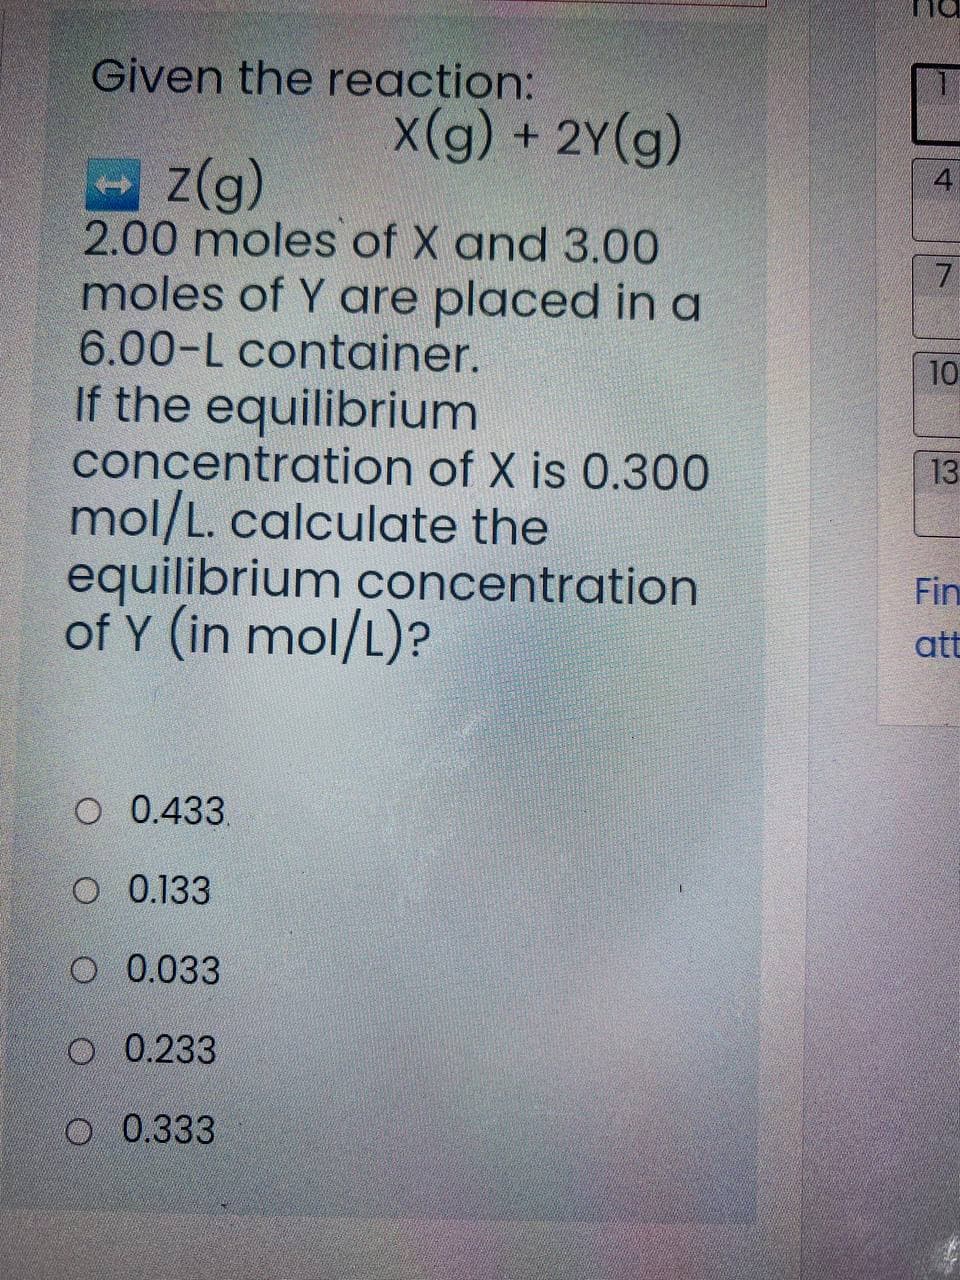 Given the reaction:
X(g) + 2Y(g)
z(g)
2.00 moles of X and 3.00
moles of Y are placed in a
6.00-L container.
7.
10
If the equilibrium
concentration of X is 0.300
mol/L. calculate the
equilibrium concentration
of Y (in mol/L)?
13
Fin
att
O 0.433.
O 0.133
O 0.033
O 0.233
O 0.333
